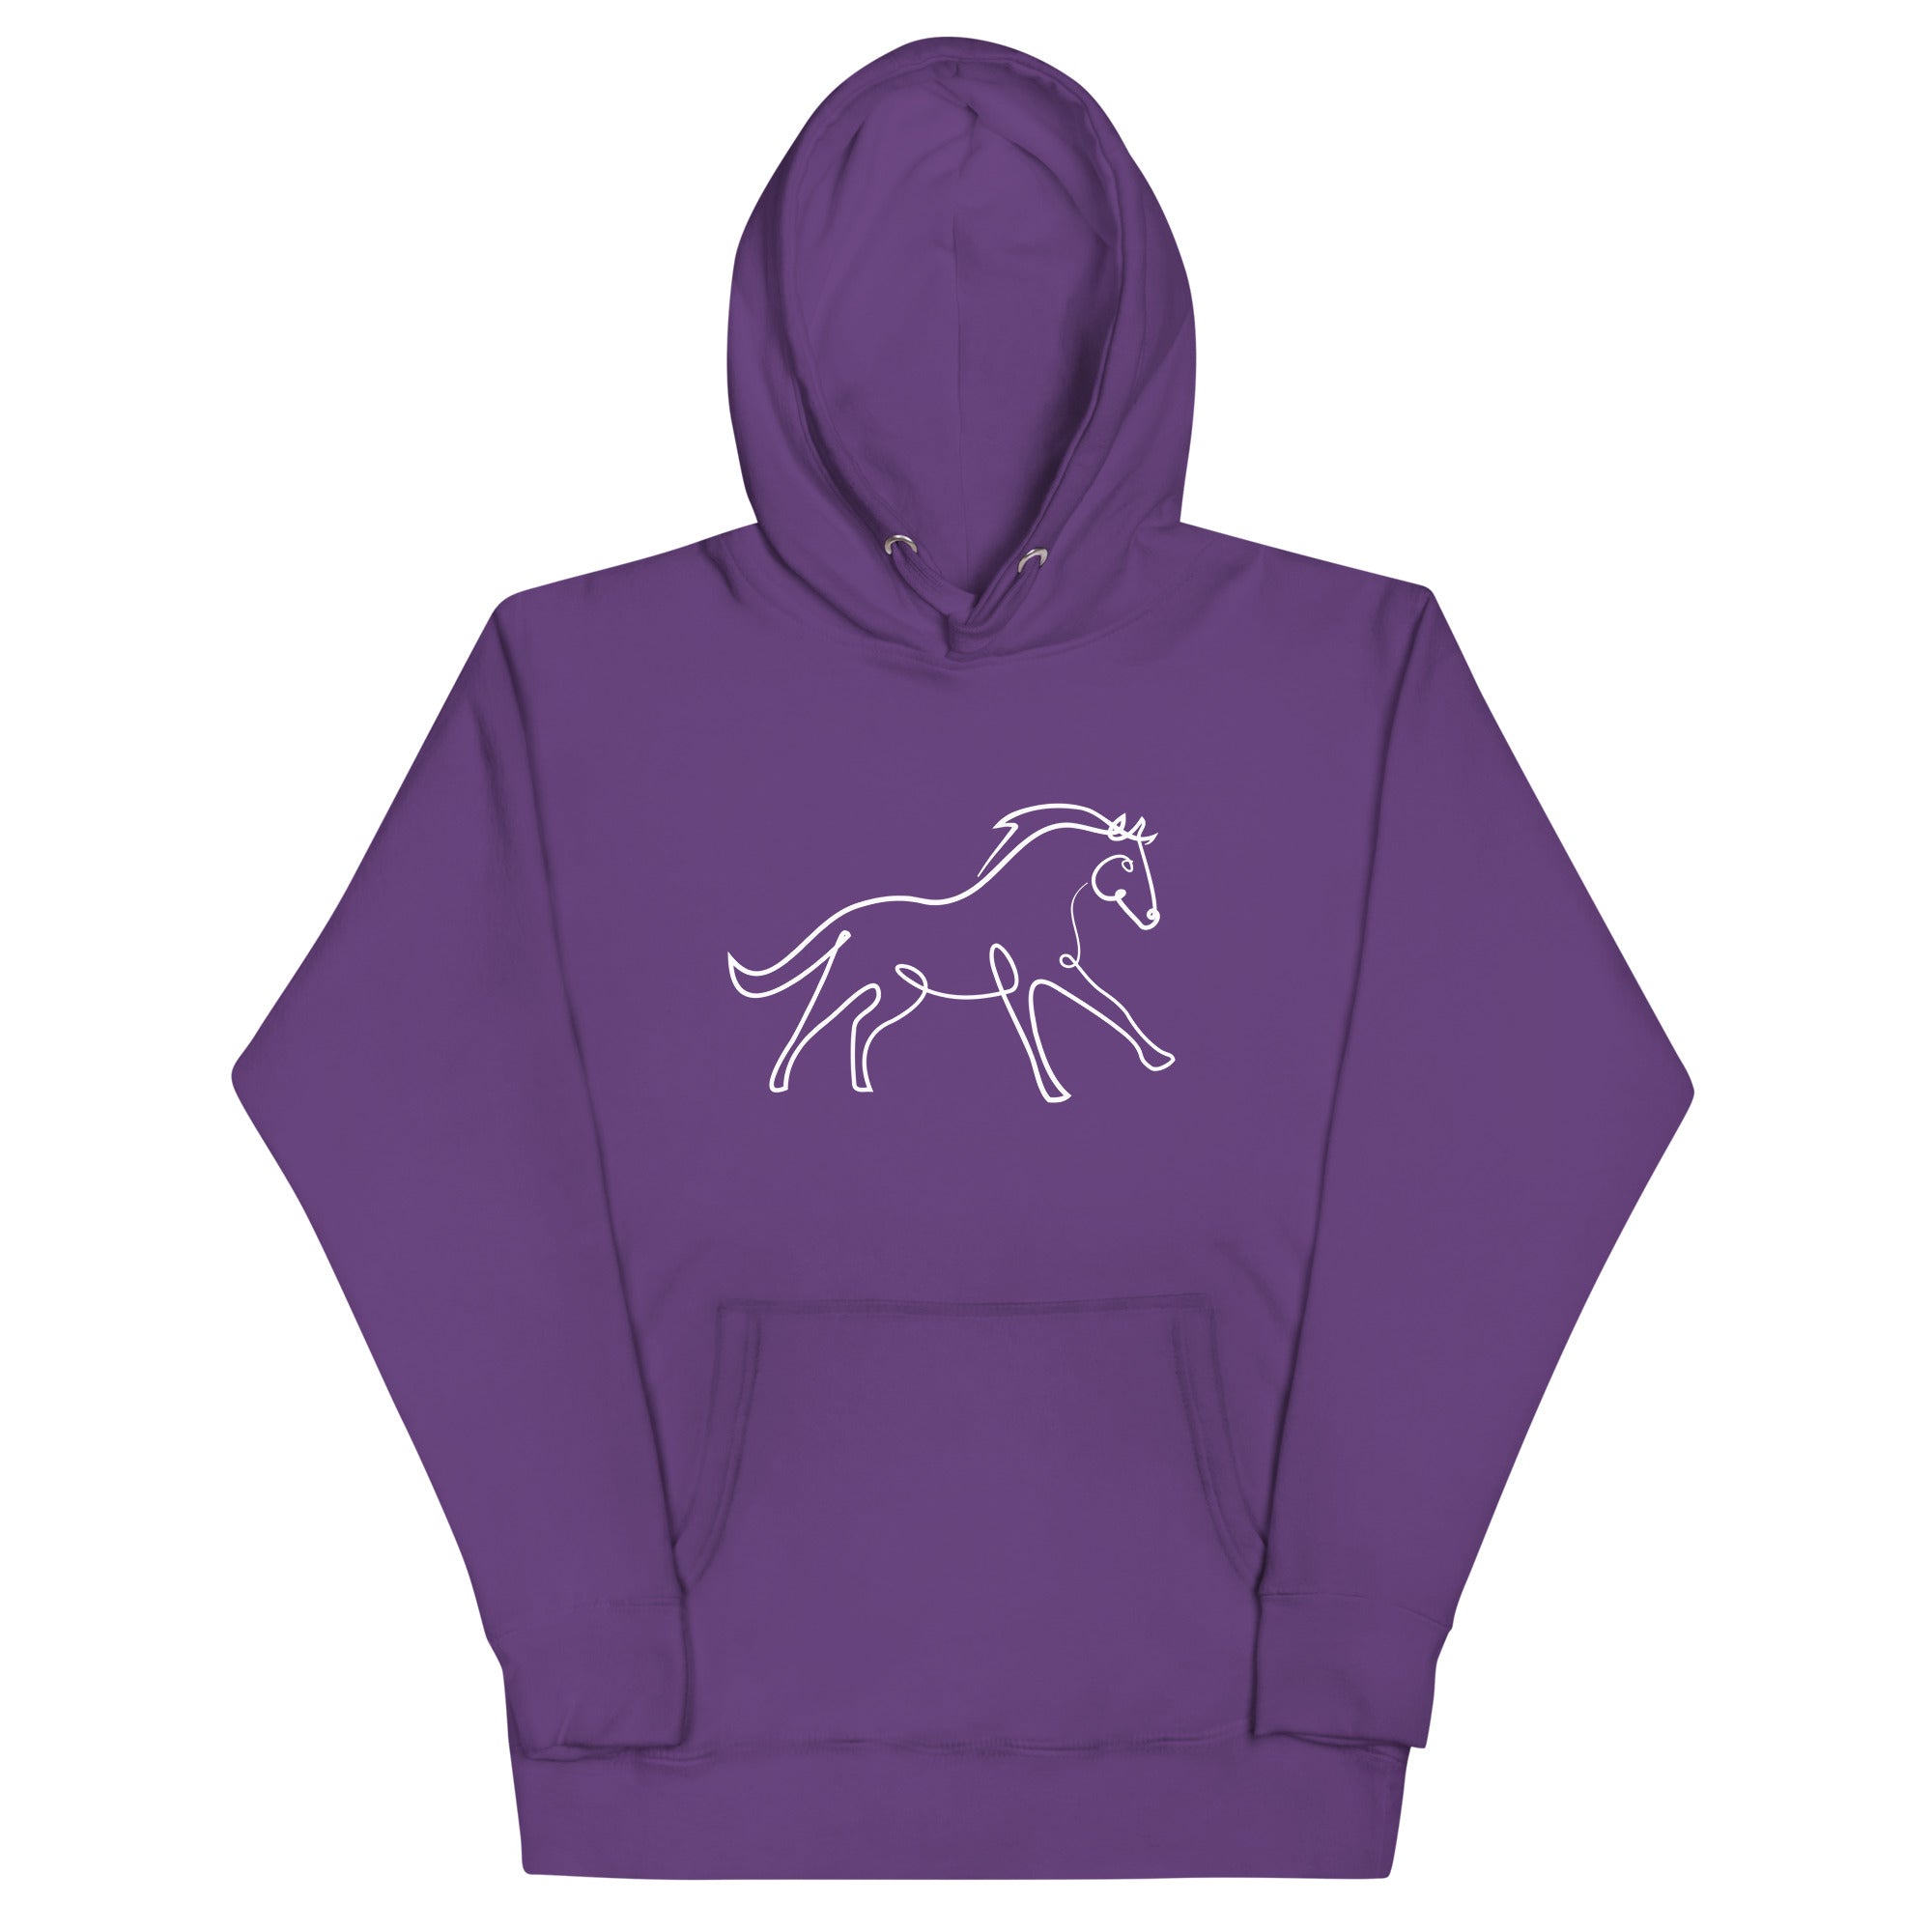 Unisex Hoodie FEI Official Store